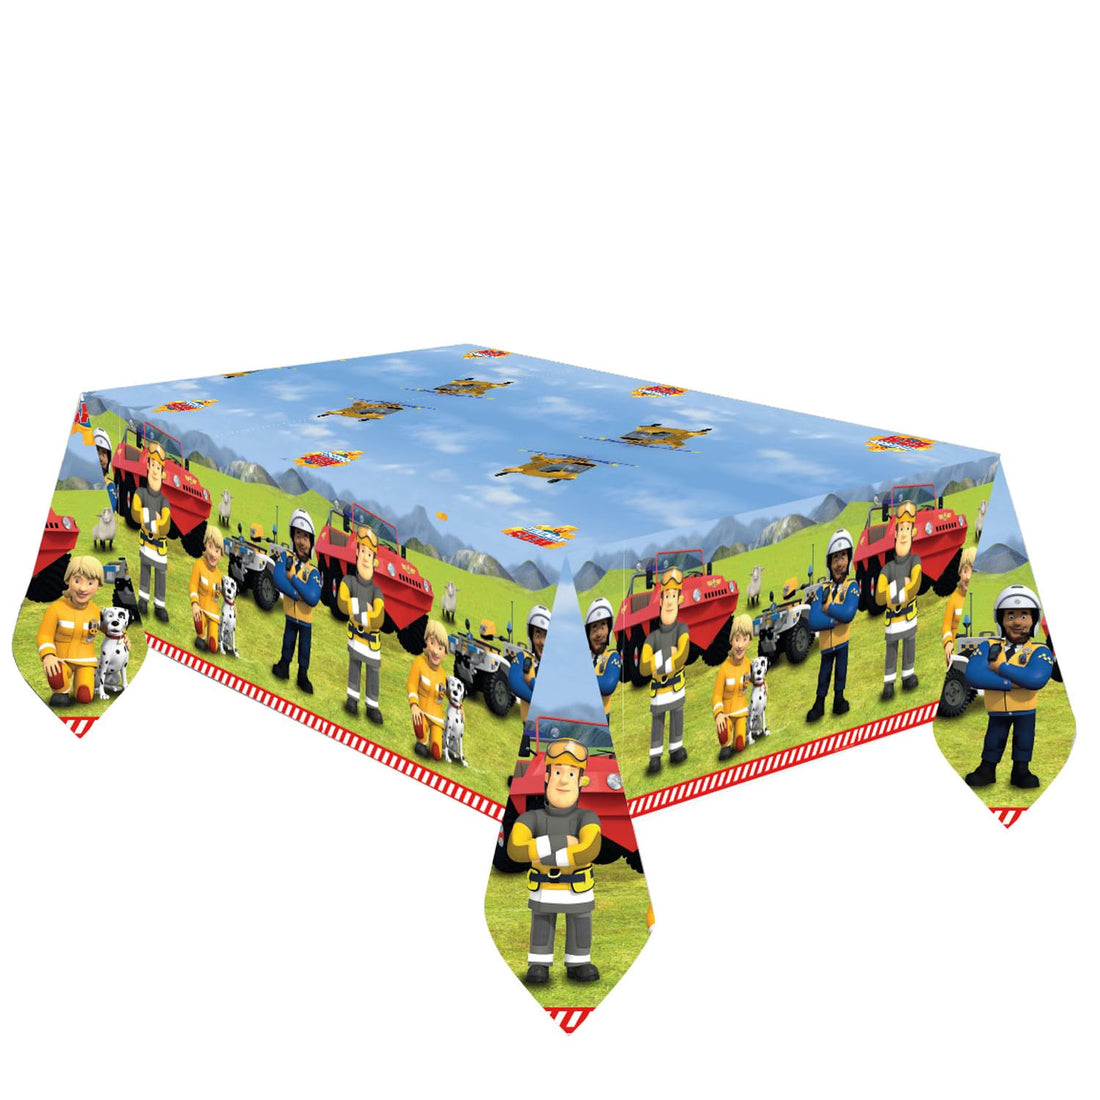 amscan 9912961 - Officially Licensed Fireman Sam Paper Party Table Cover - 1.2 x 1.8m